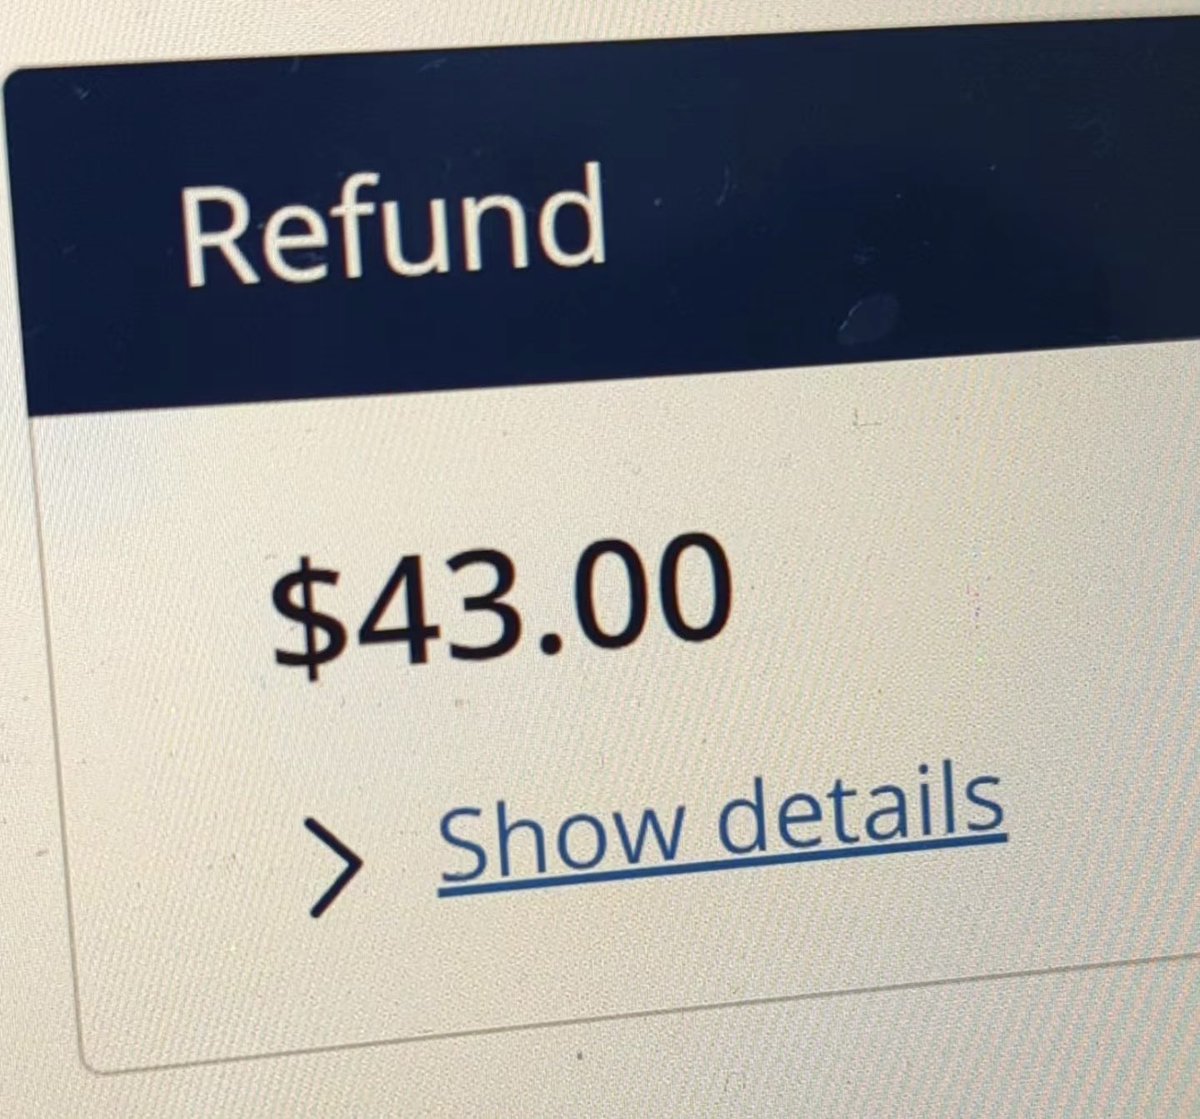 Wife bought a $9K return ticket from China (yes, $9,000). This is standard these days. @united airlines has just sent an email saying the return trip is now “unconfirmed”, could be cancelled. She’s asked for a refund and has been offered $43 (yes, forty-three dollars)